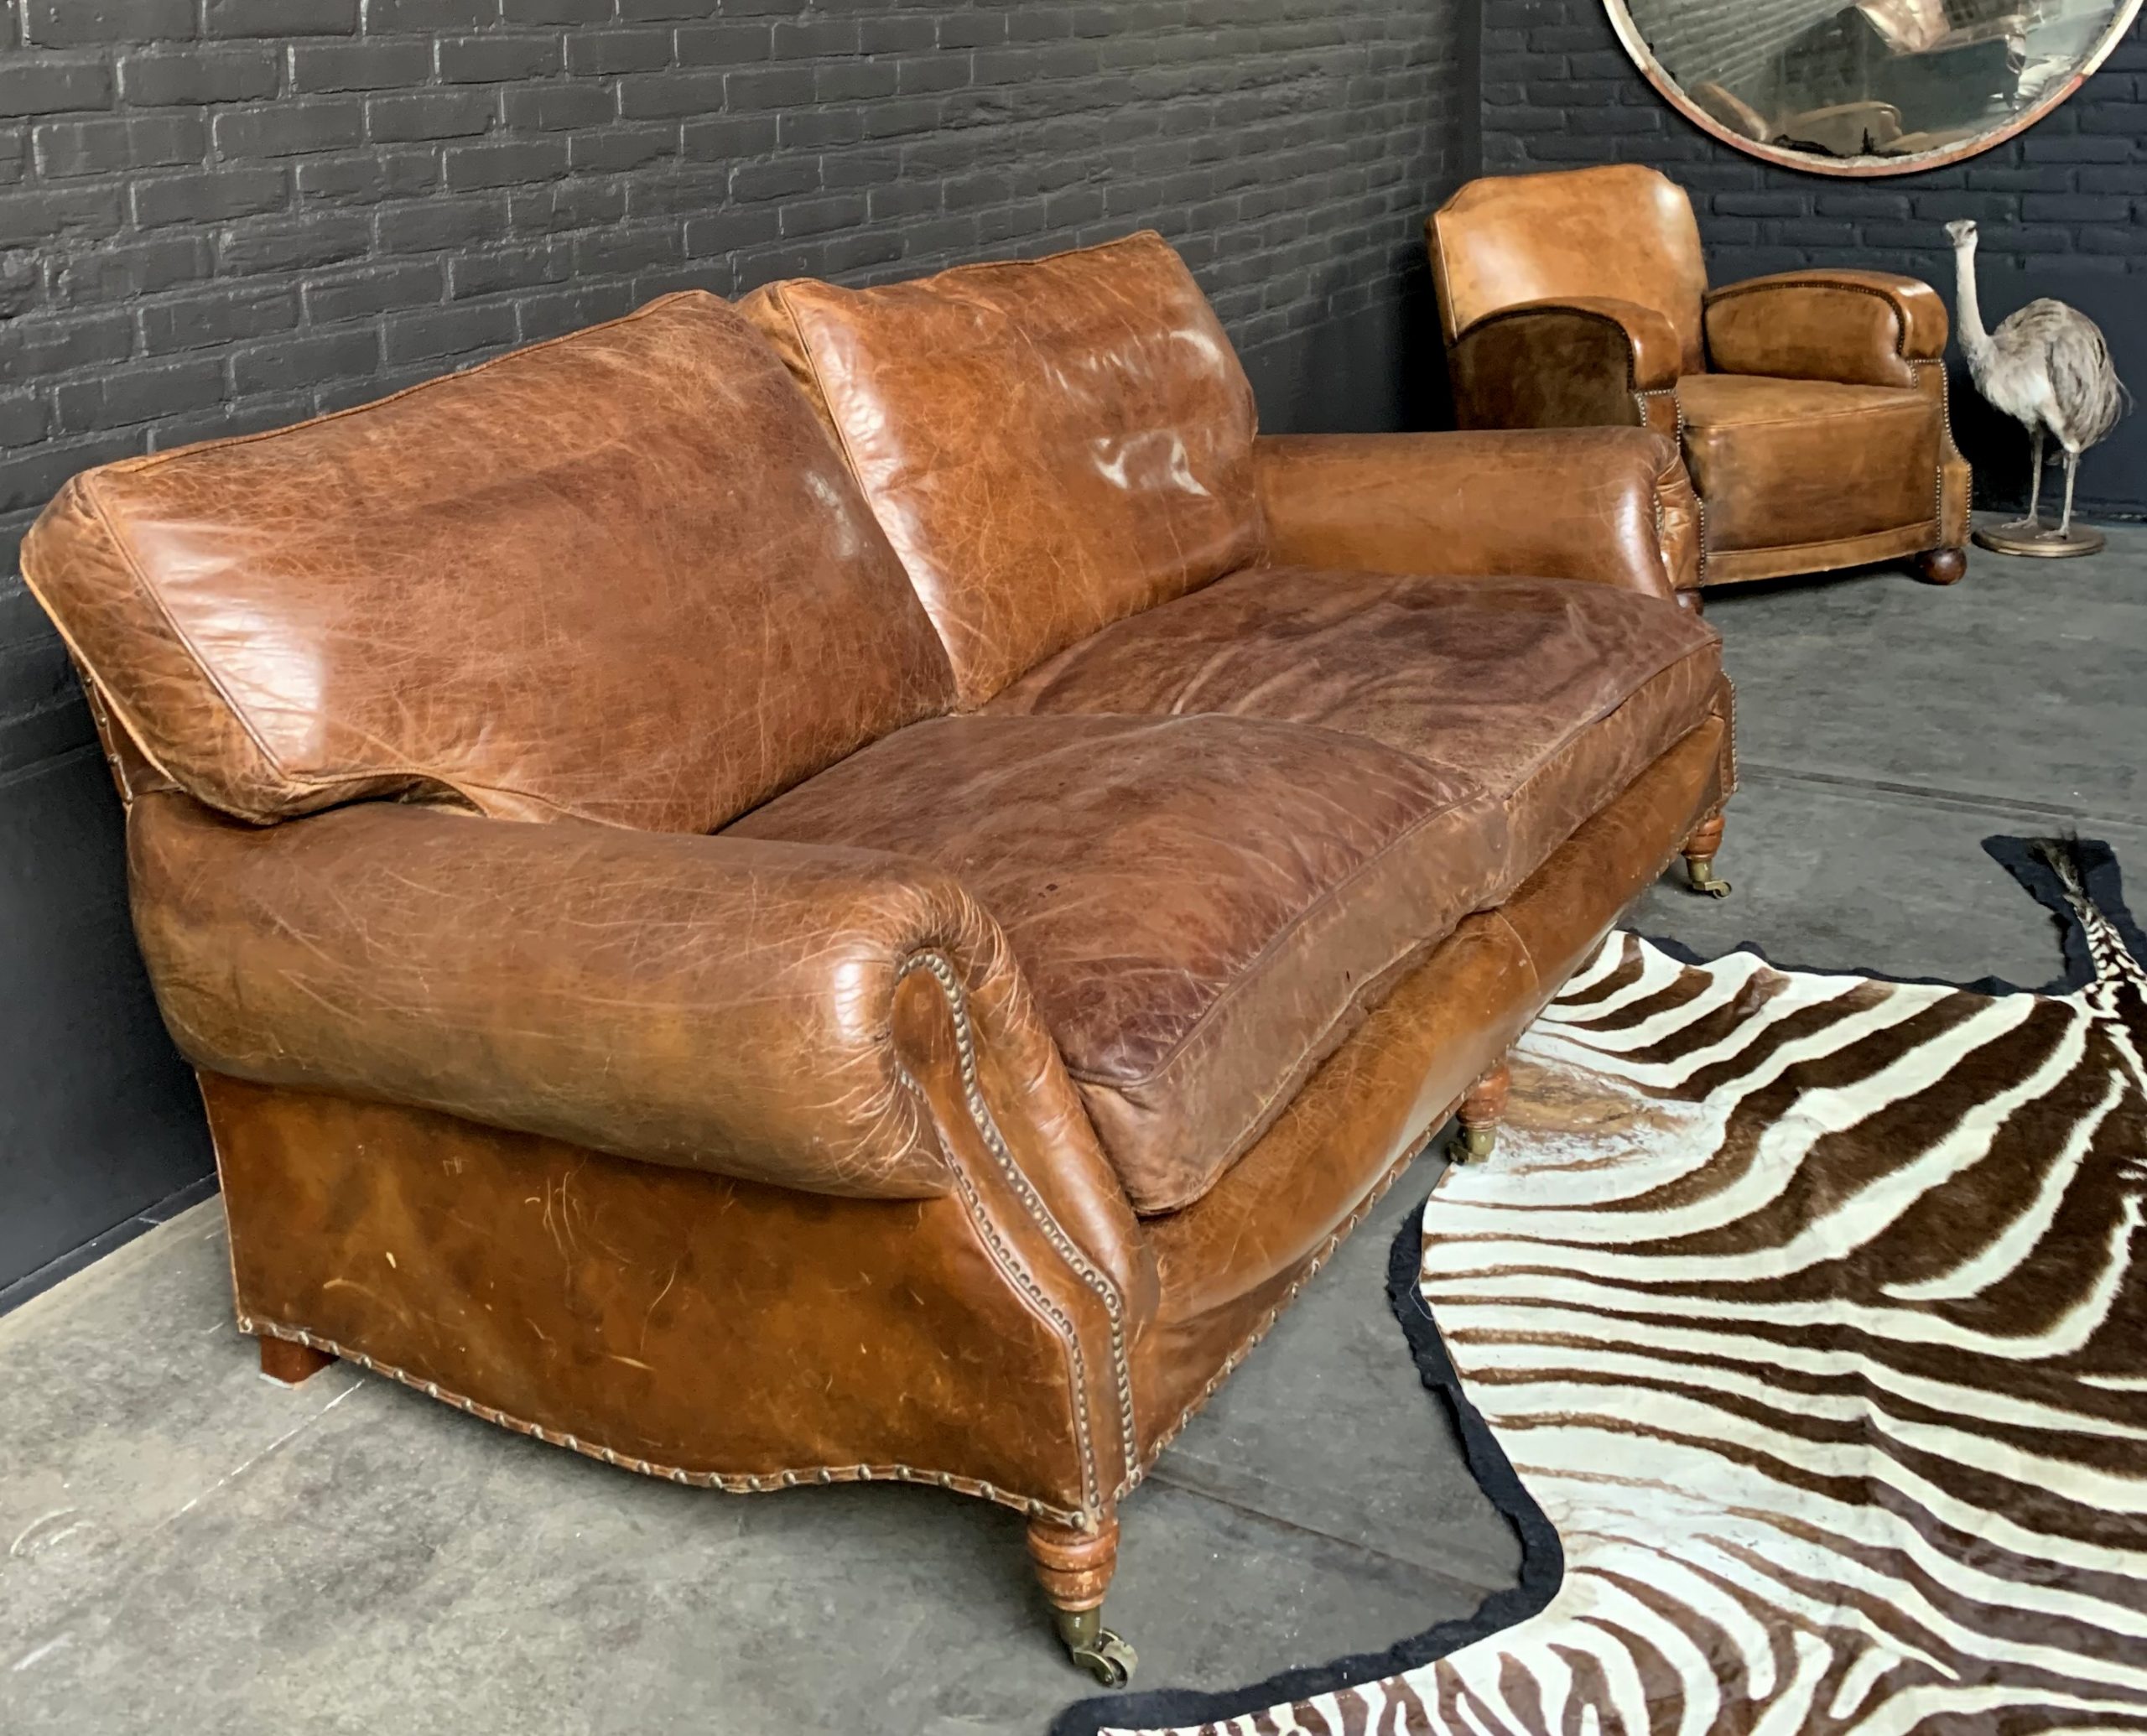 Leather Ralph Lauren Couch Beast, Ralph Lauren Leather Couch